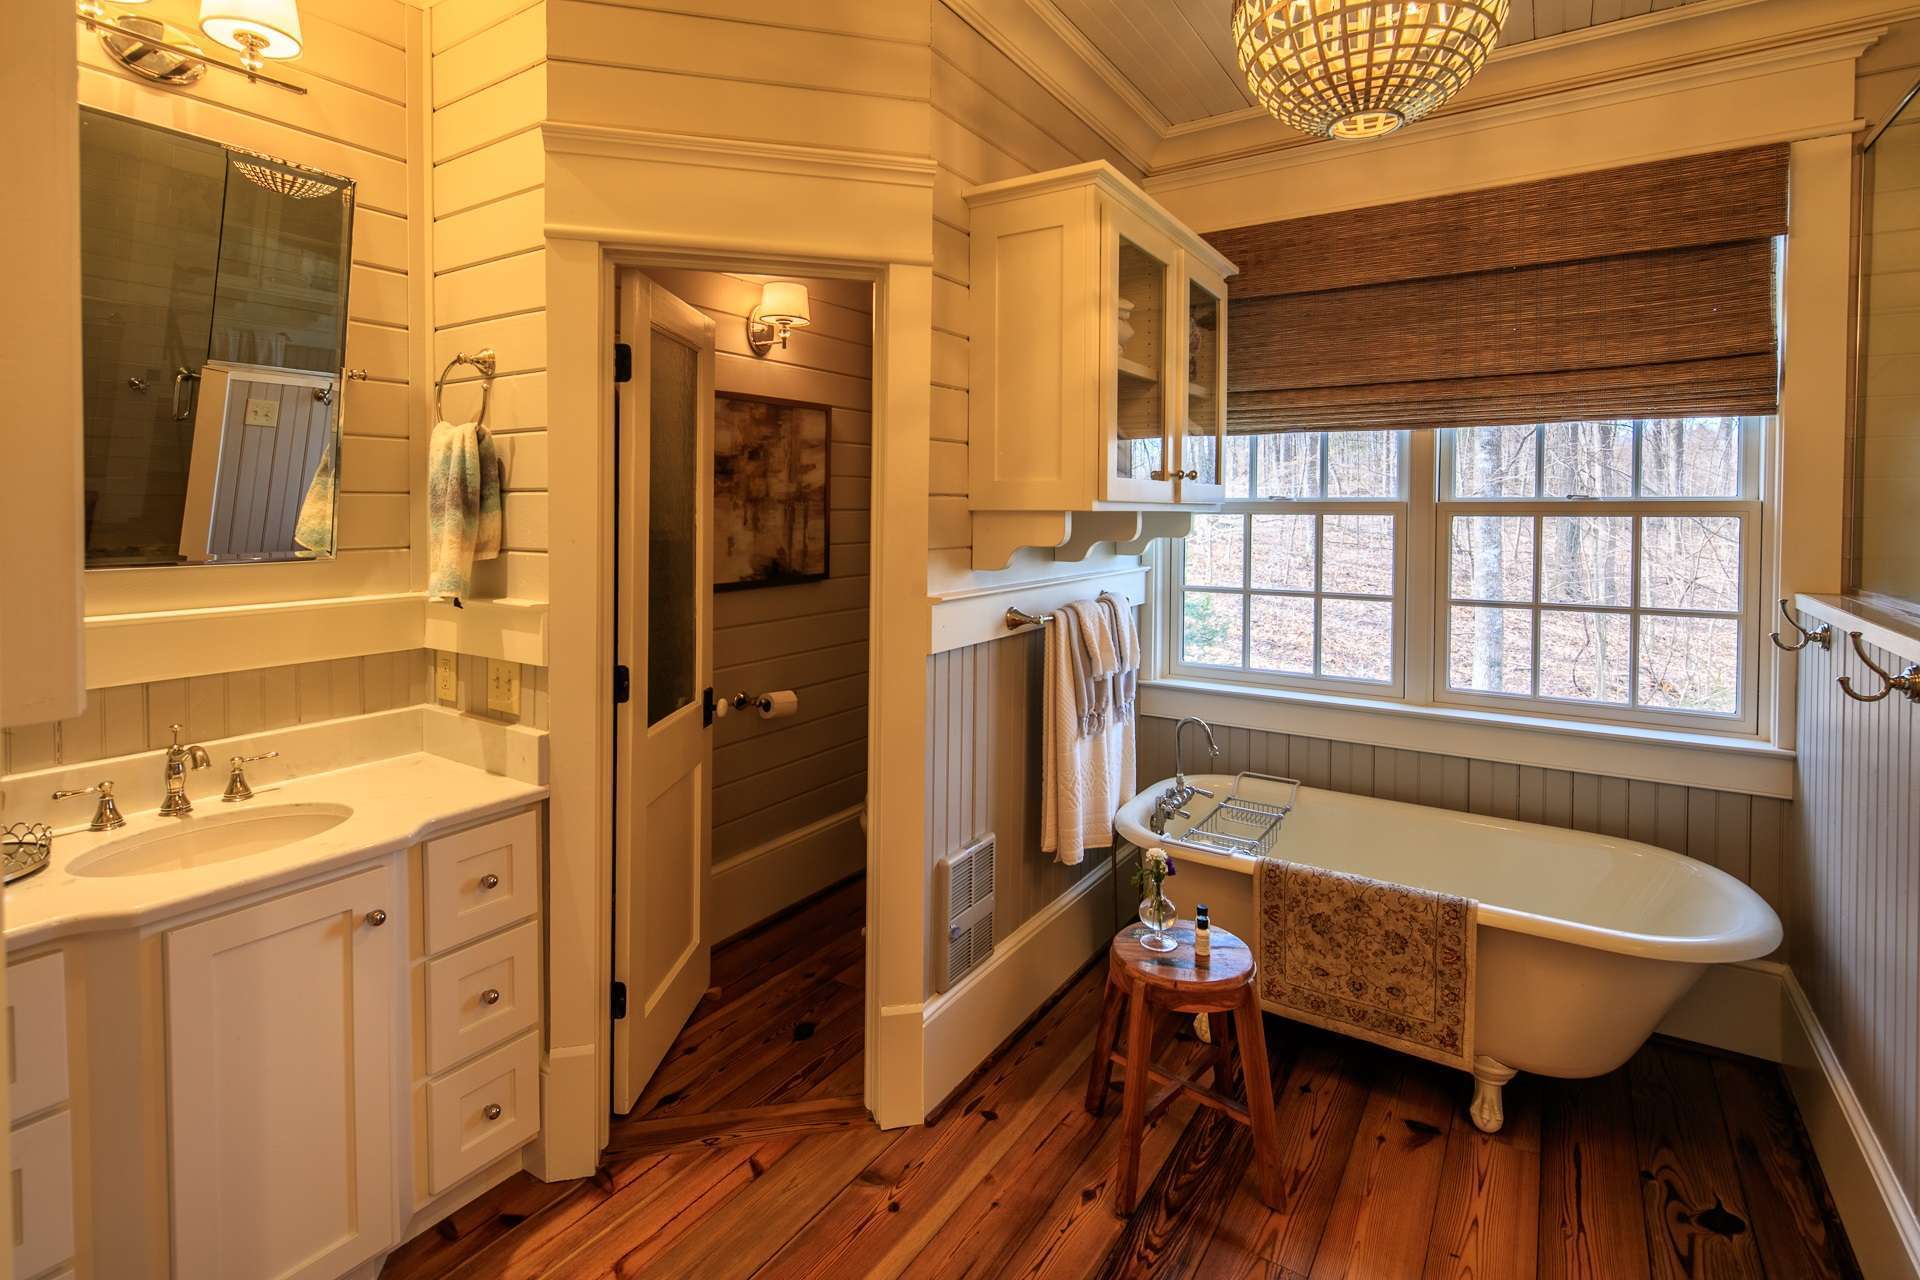 The private master bath features the farmhouse clawfoot soaking tub, an elegant walk-in shower and Jack and Jill vanities.